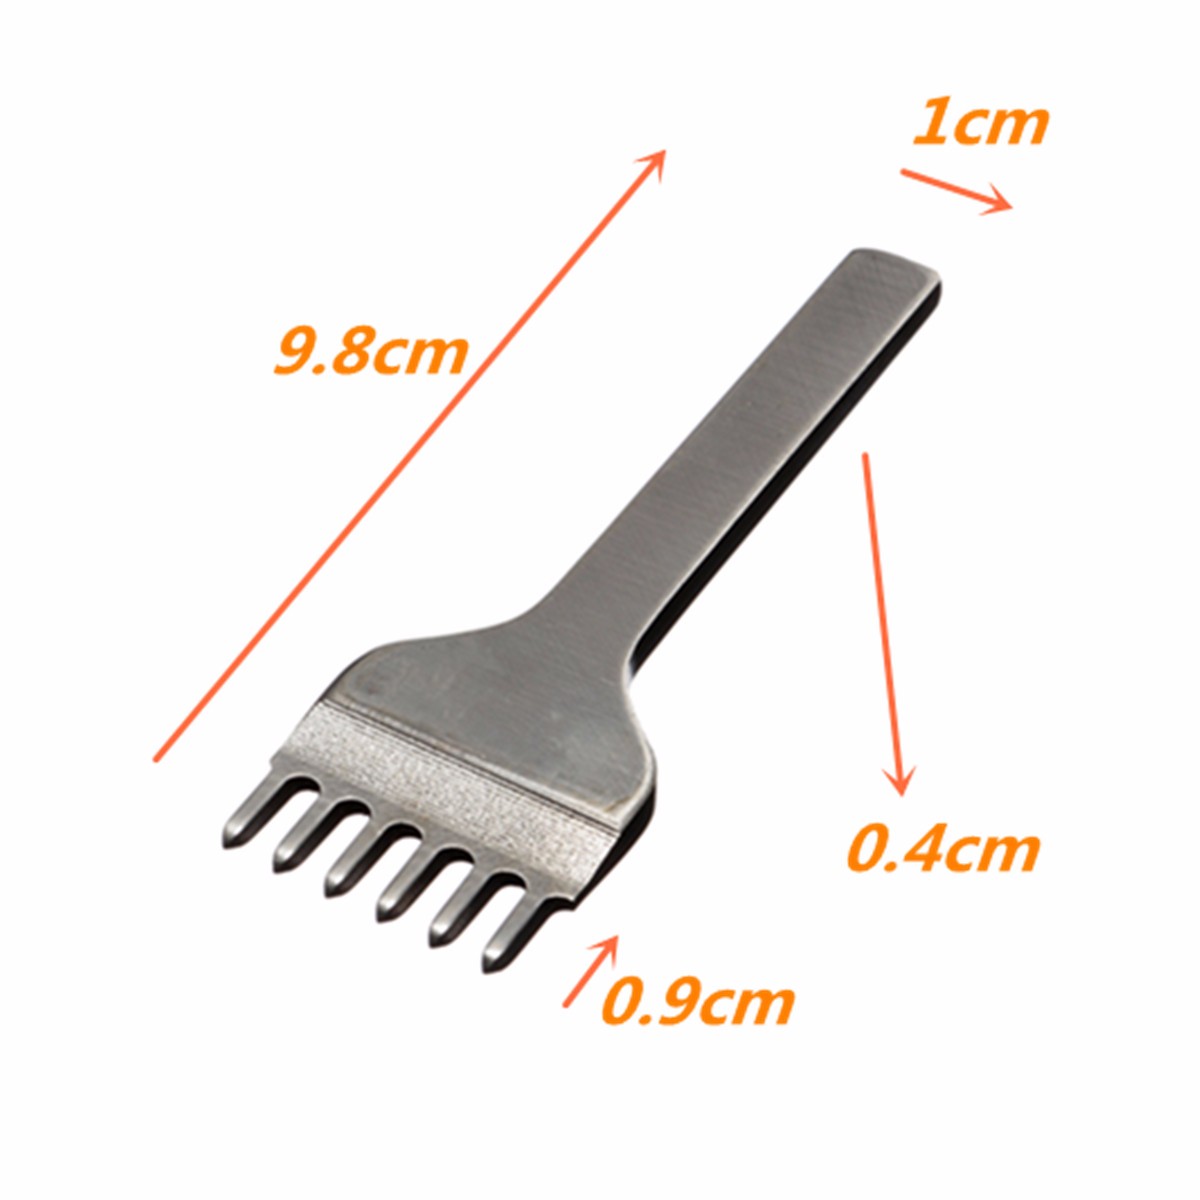 5mm-Leather-Craft-Leather-Craft-Hole-Stitching-Punch-Tools-1246-1-set-Prong-1041728-7